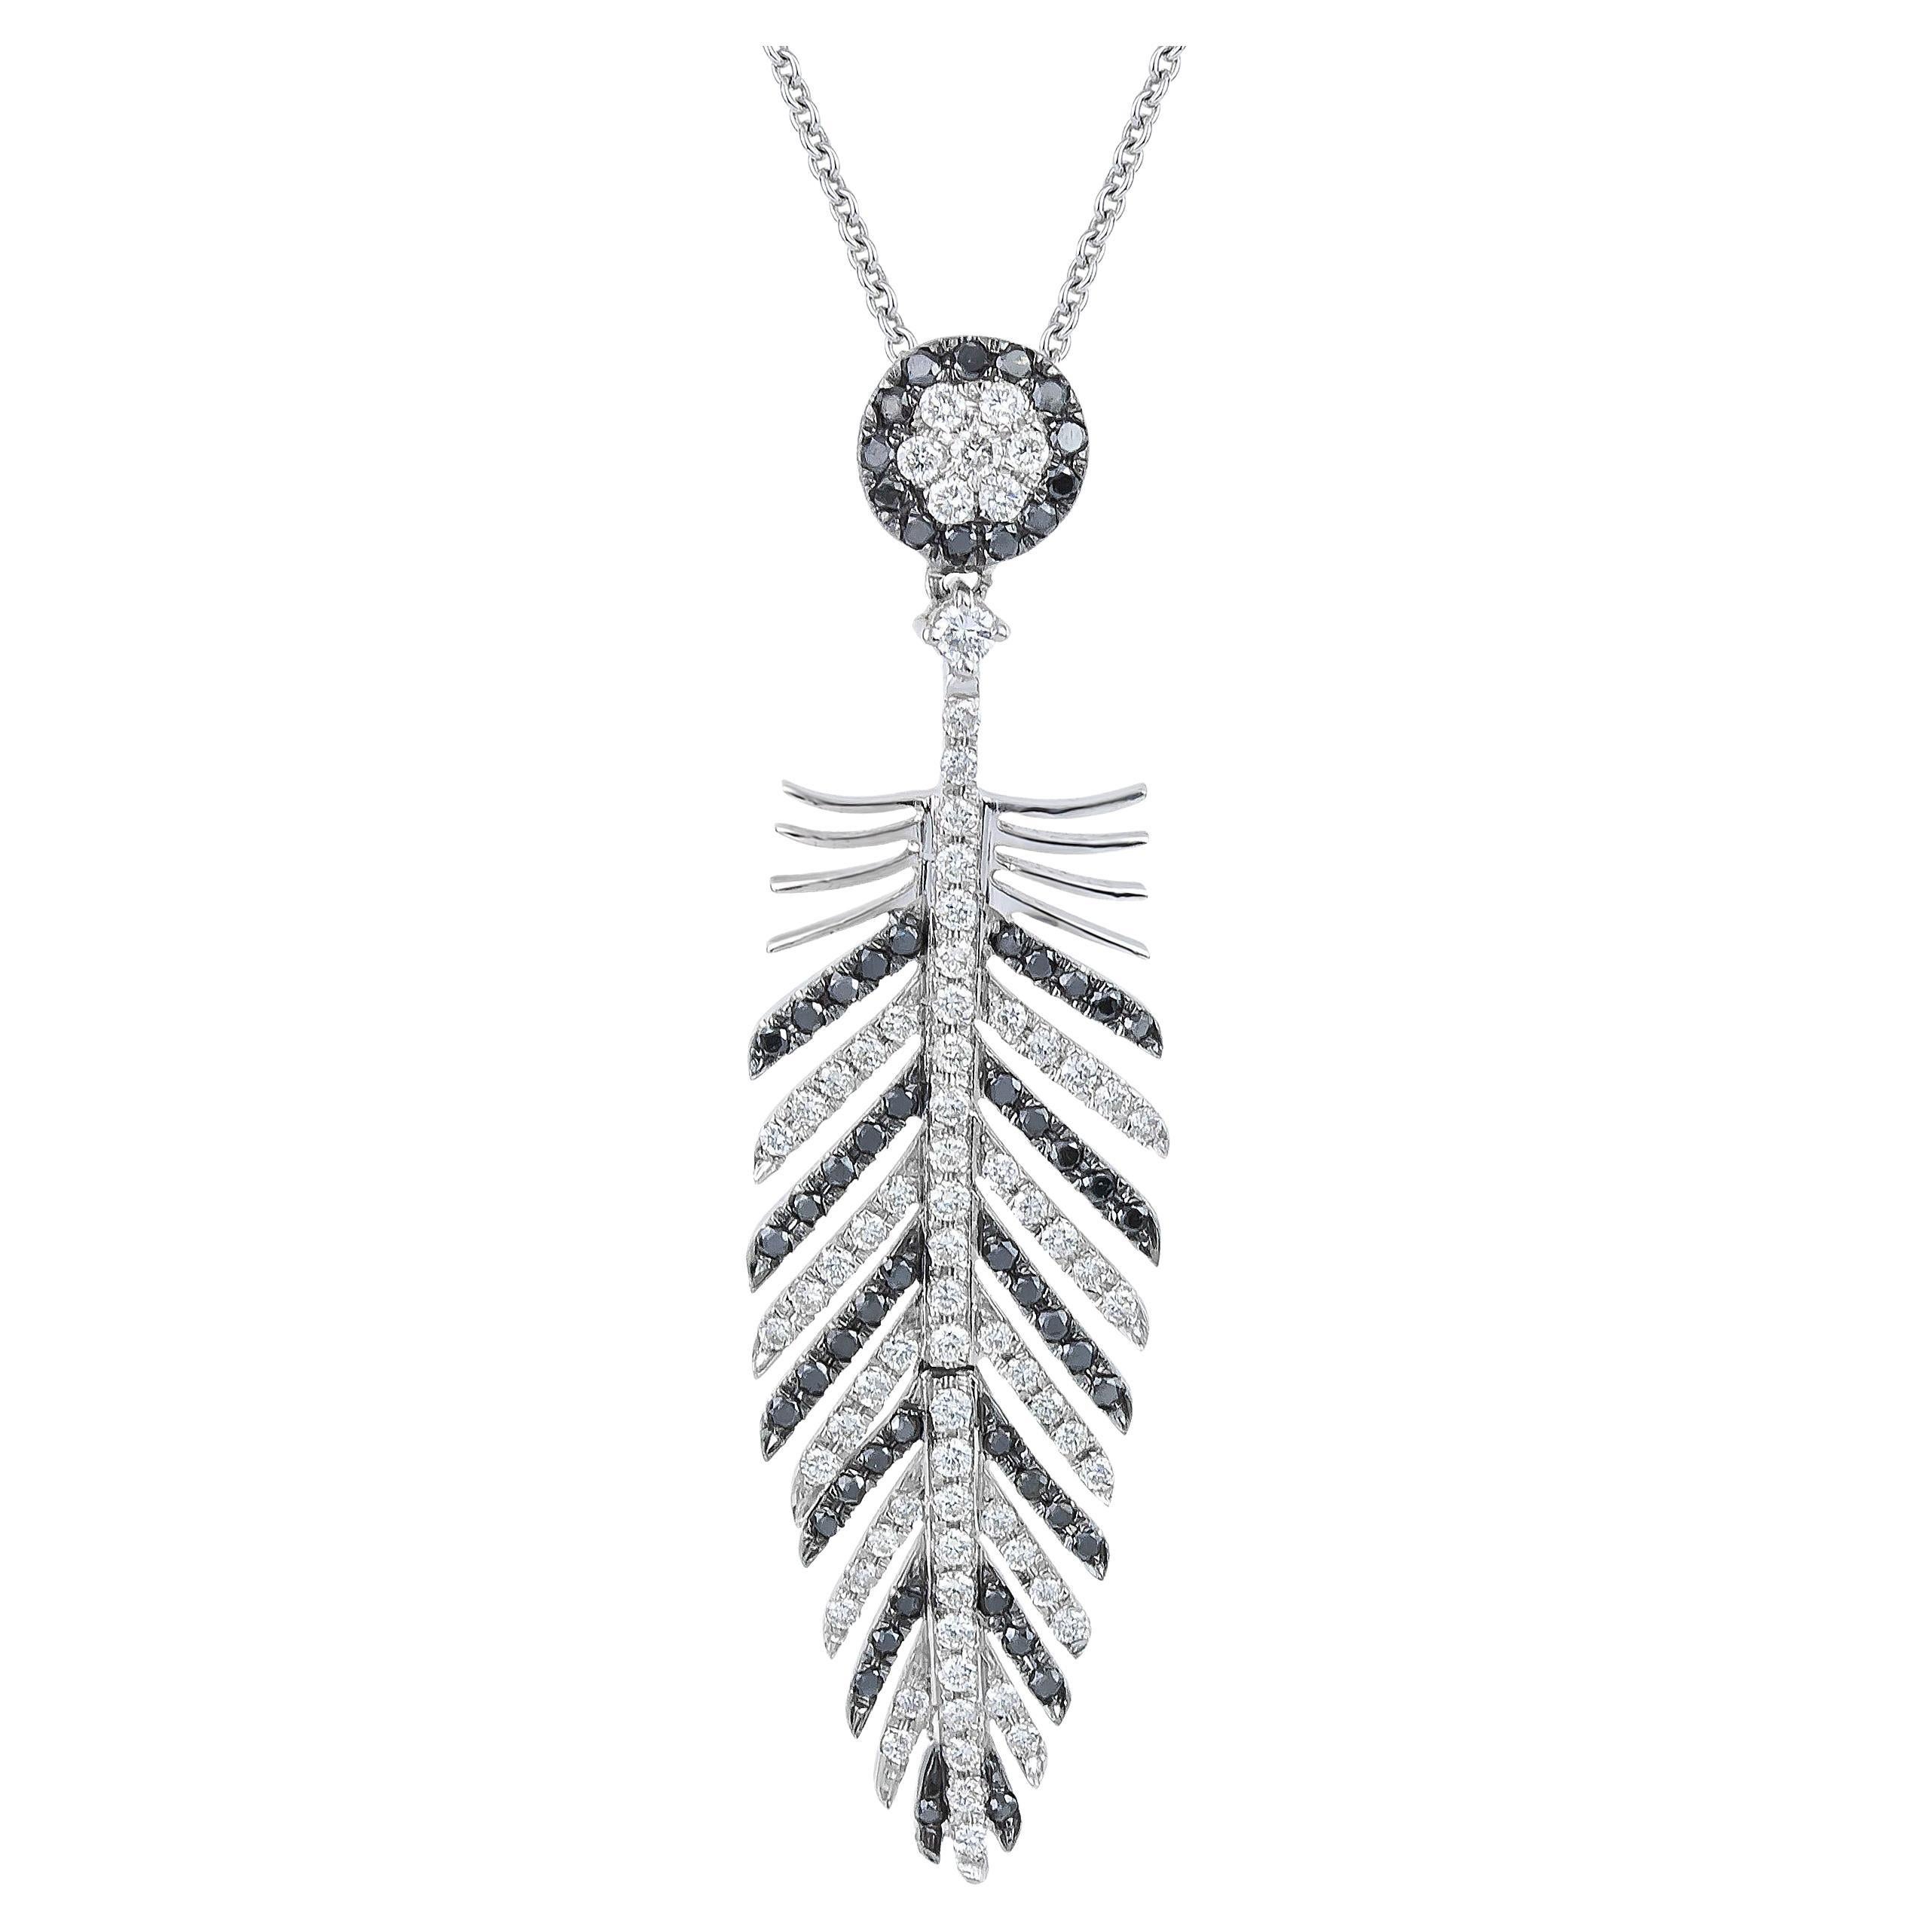 What does feather jewelry mean?